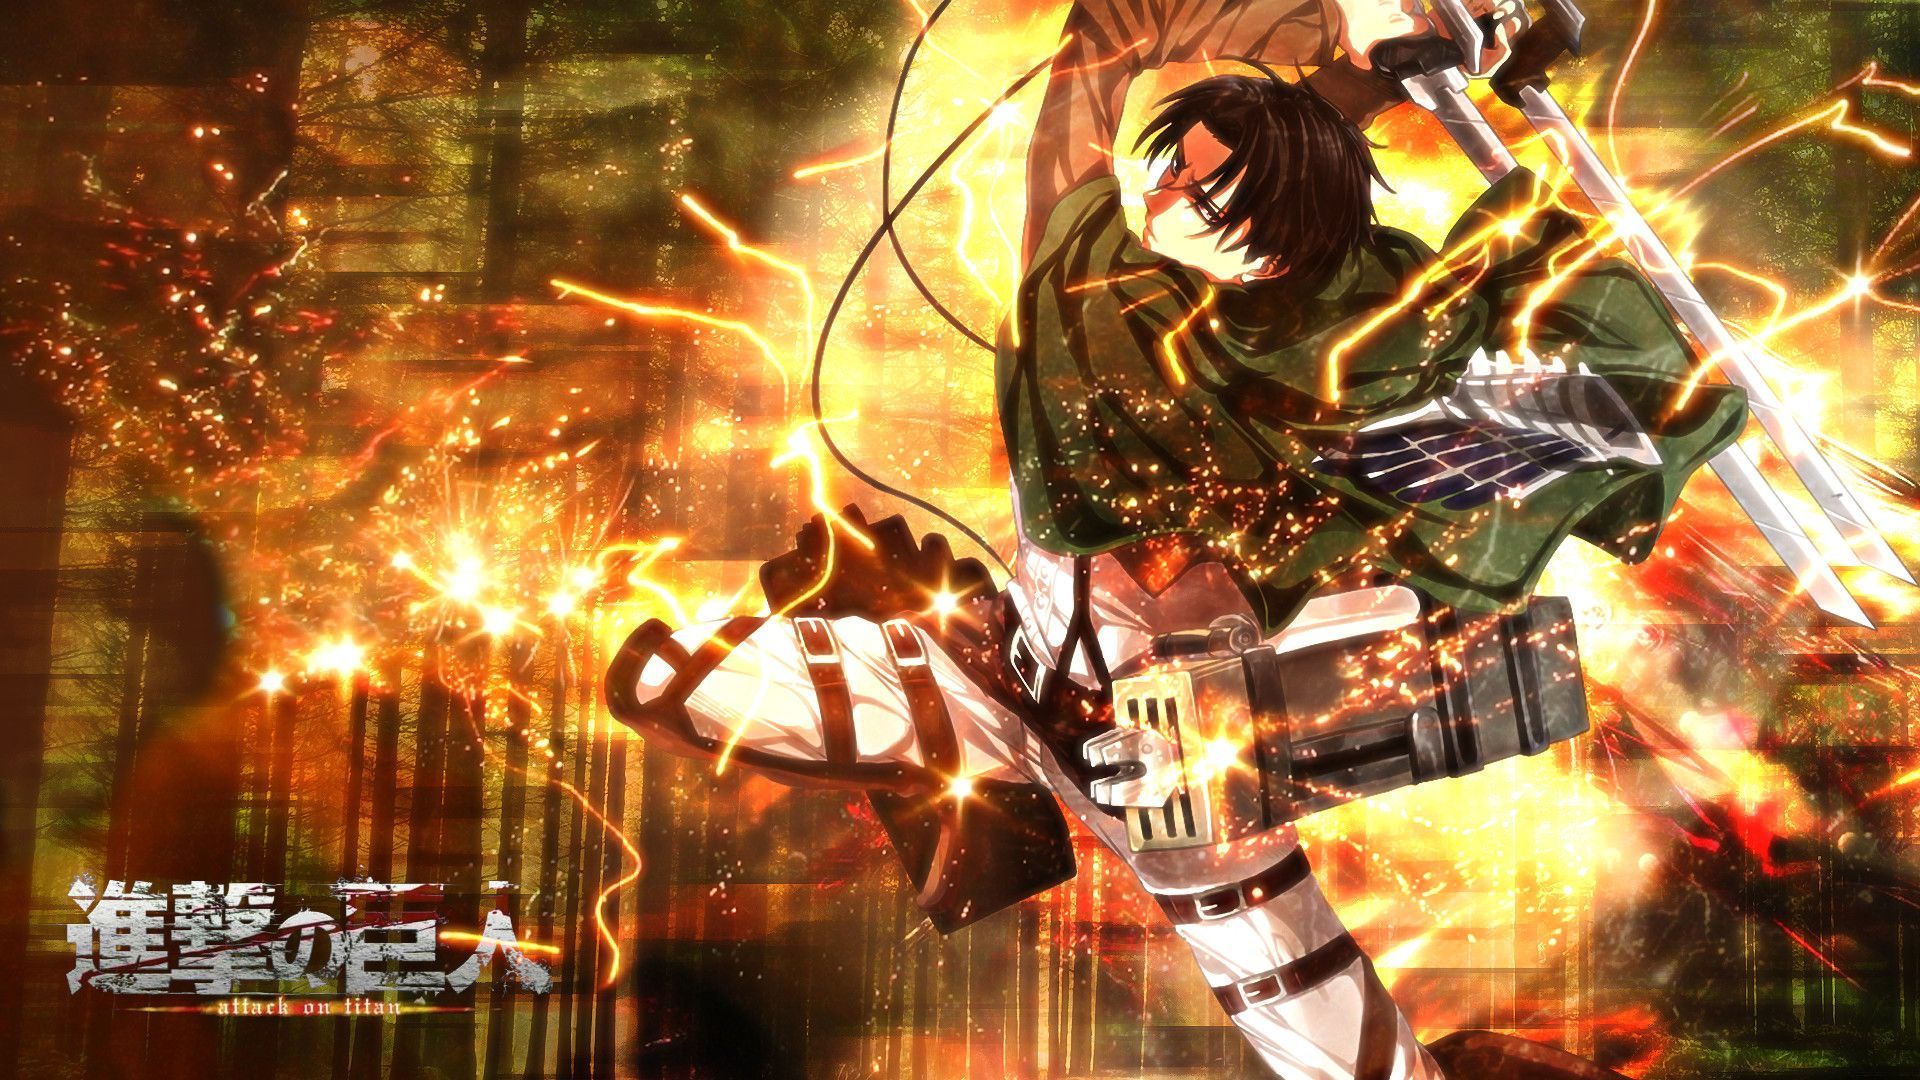 Res: 1920x. Levi Attack on Titan Wallpaper by skeptec. Attack on titan, Attack on titan levi, Anime wallpaper